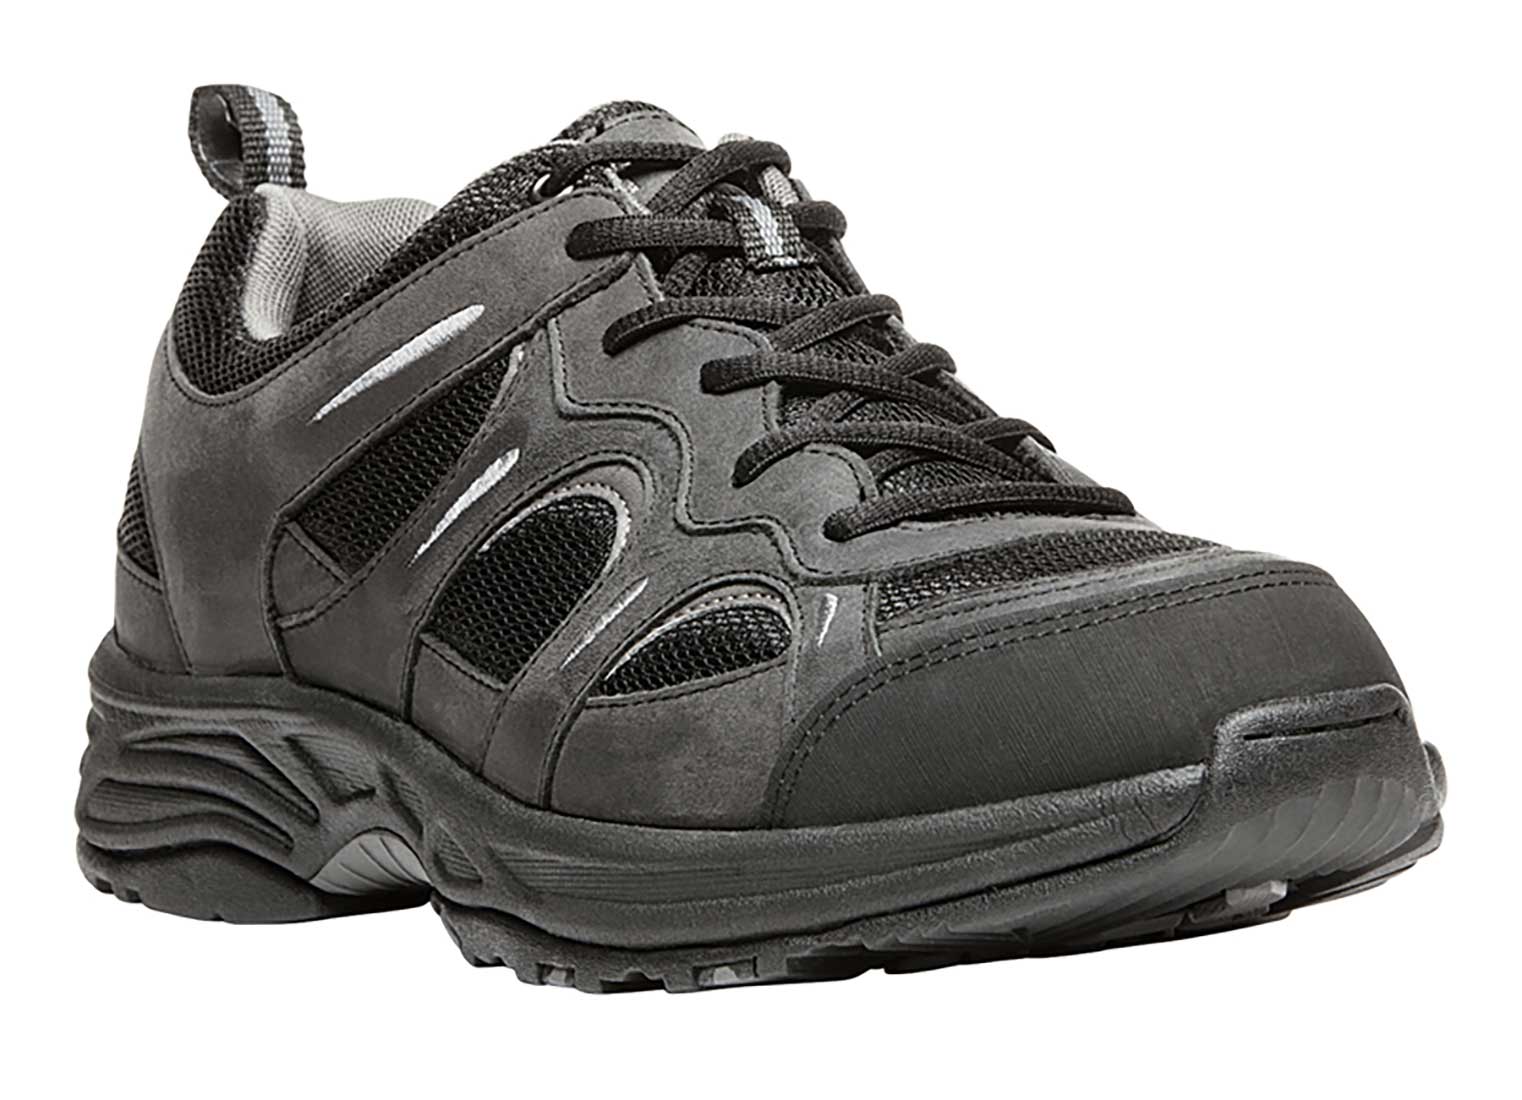 Propet Connelly M5503 Men's 2 Casual, Comfort, Diabetic Hiking Shoe - Extra Depth For Orthotics